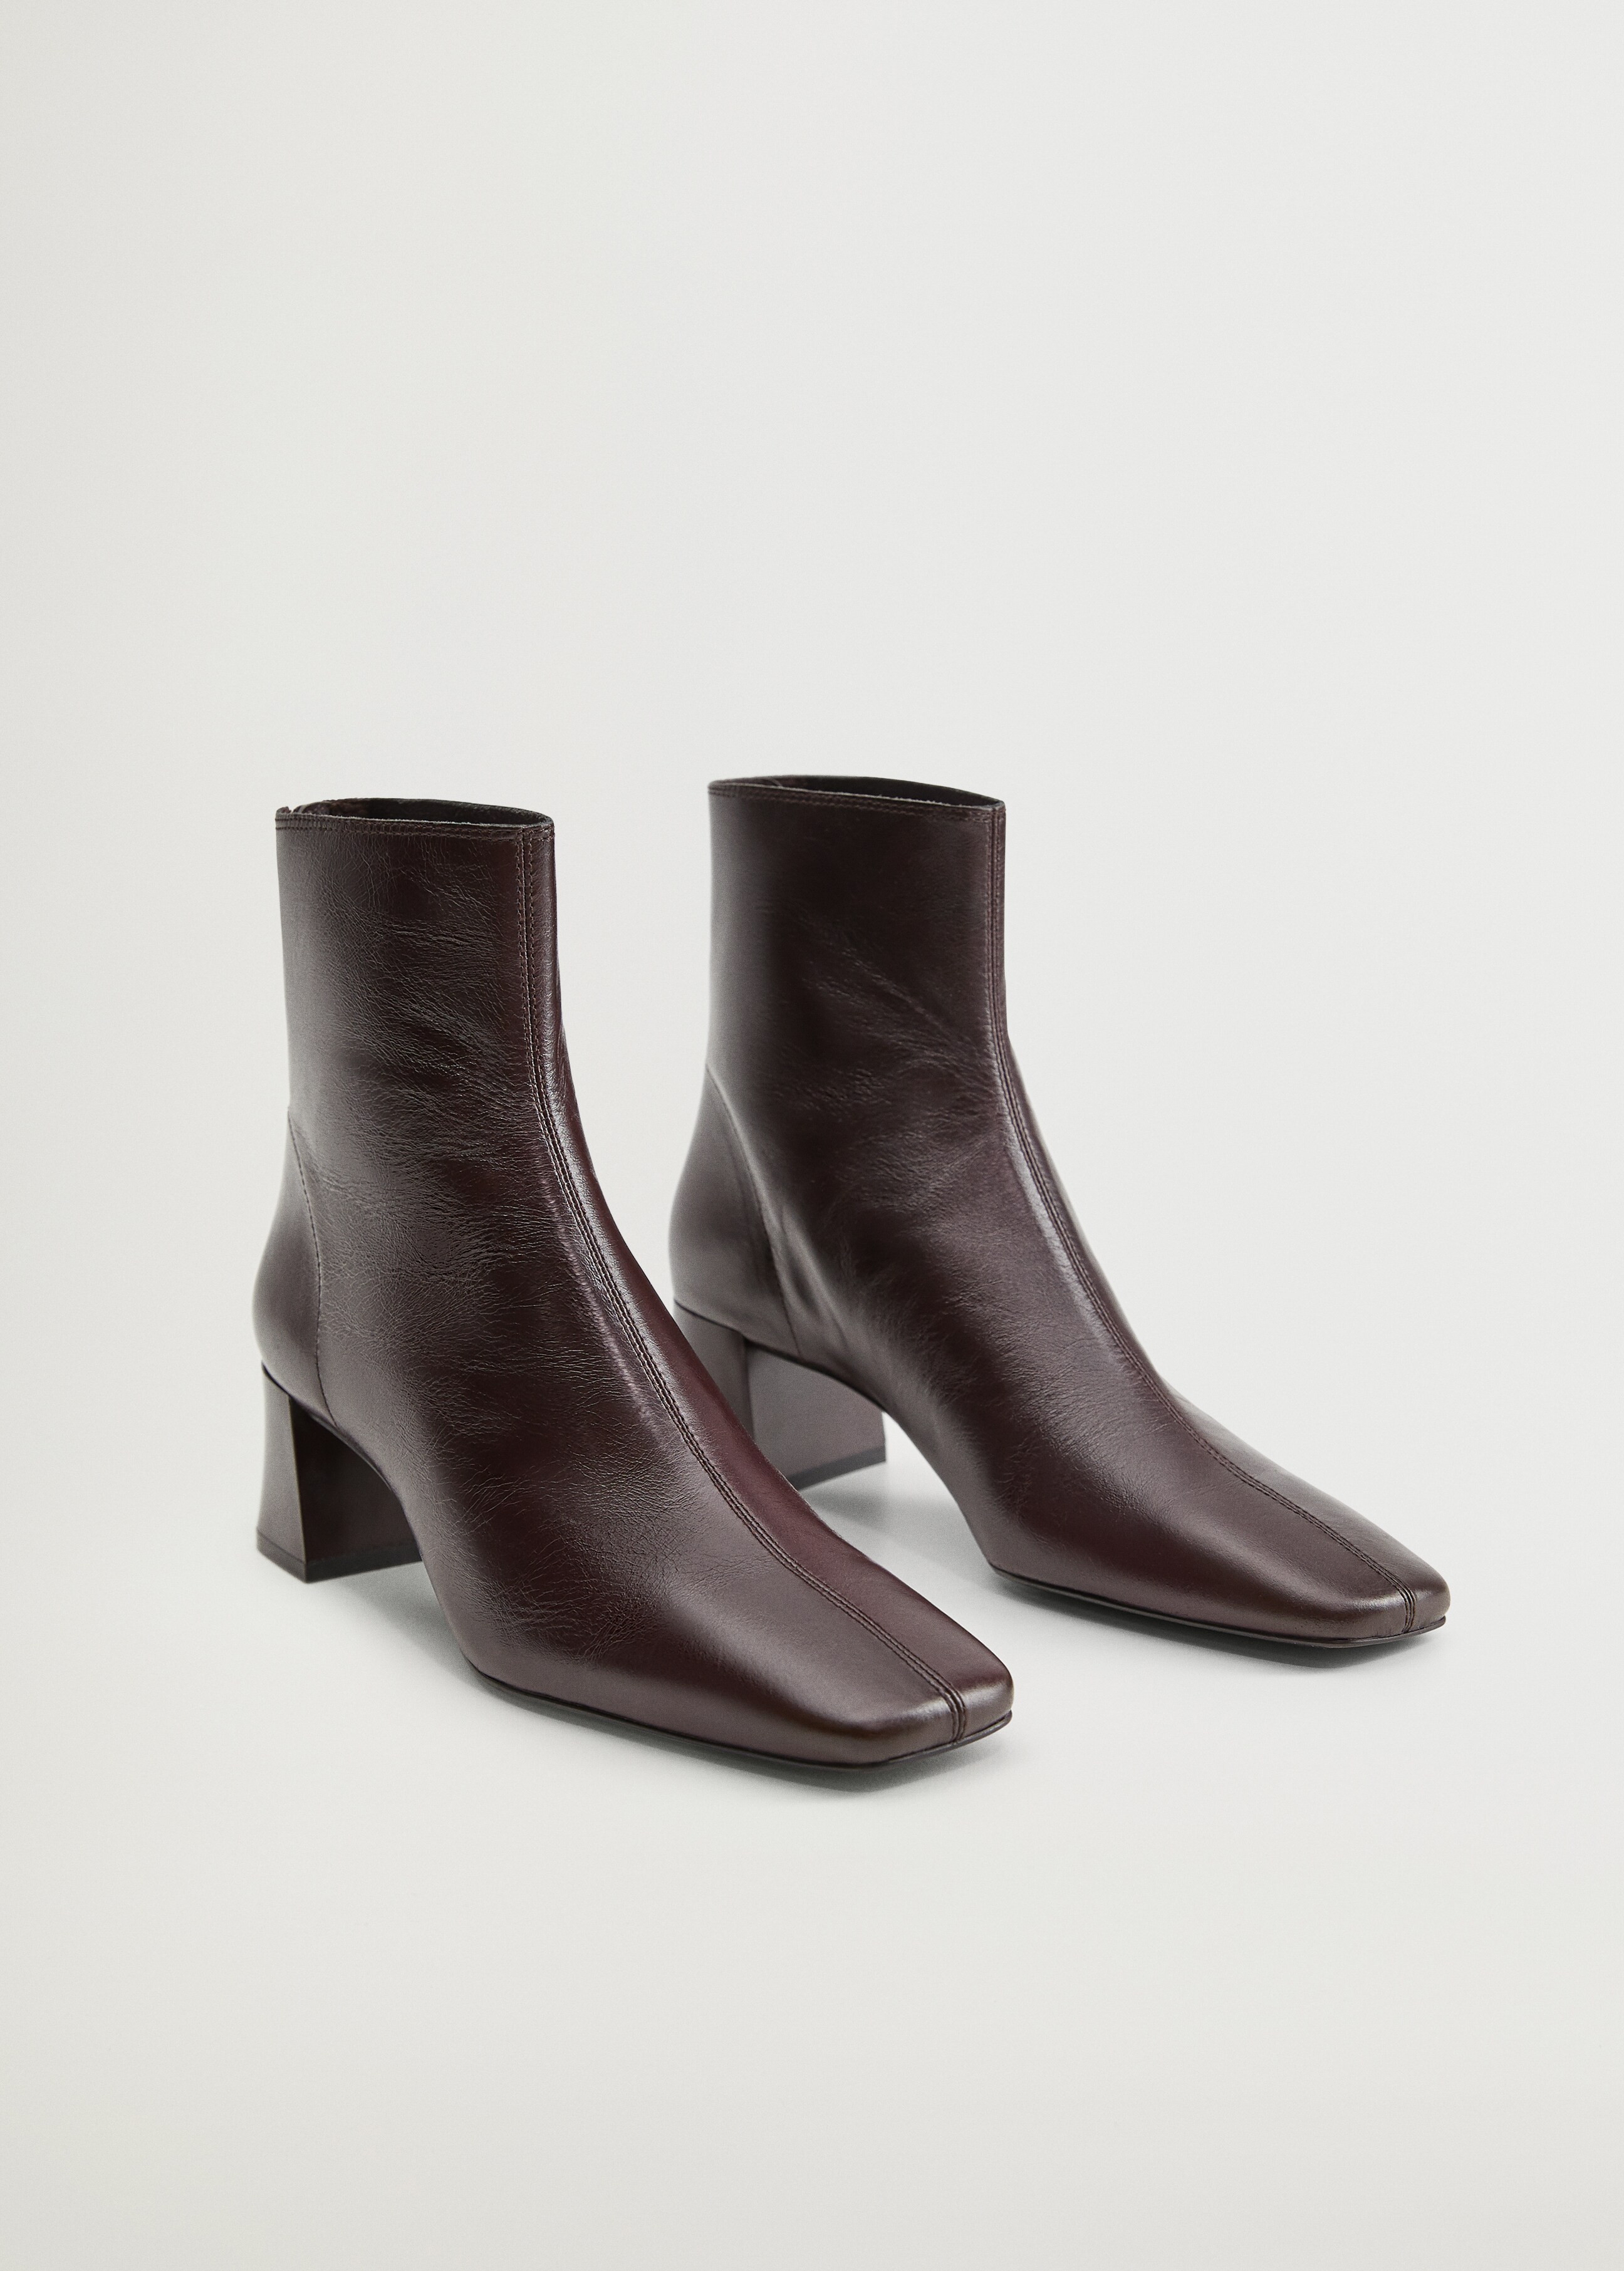 Squared toe leather ankle boots - Medium plane